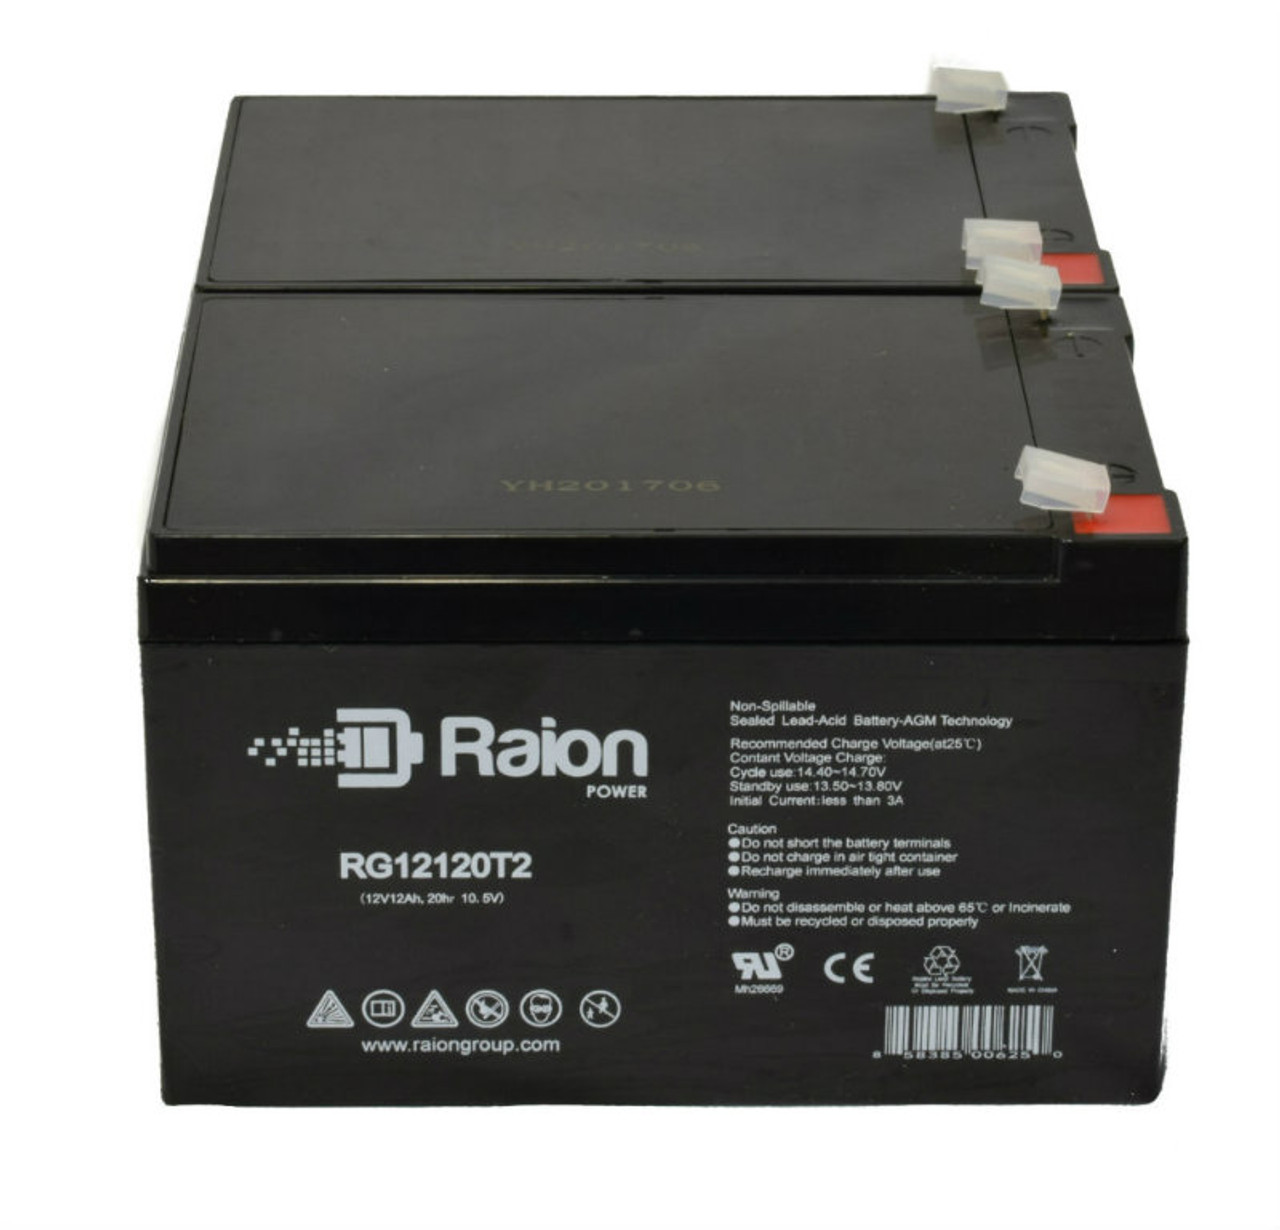 Raion Power 12V 12Ah Non-Spillable Compatible Replacement Battery for SEC 12-MP-14 - (2 Pack)